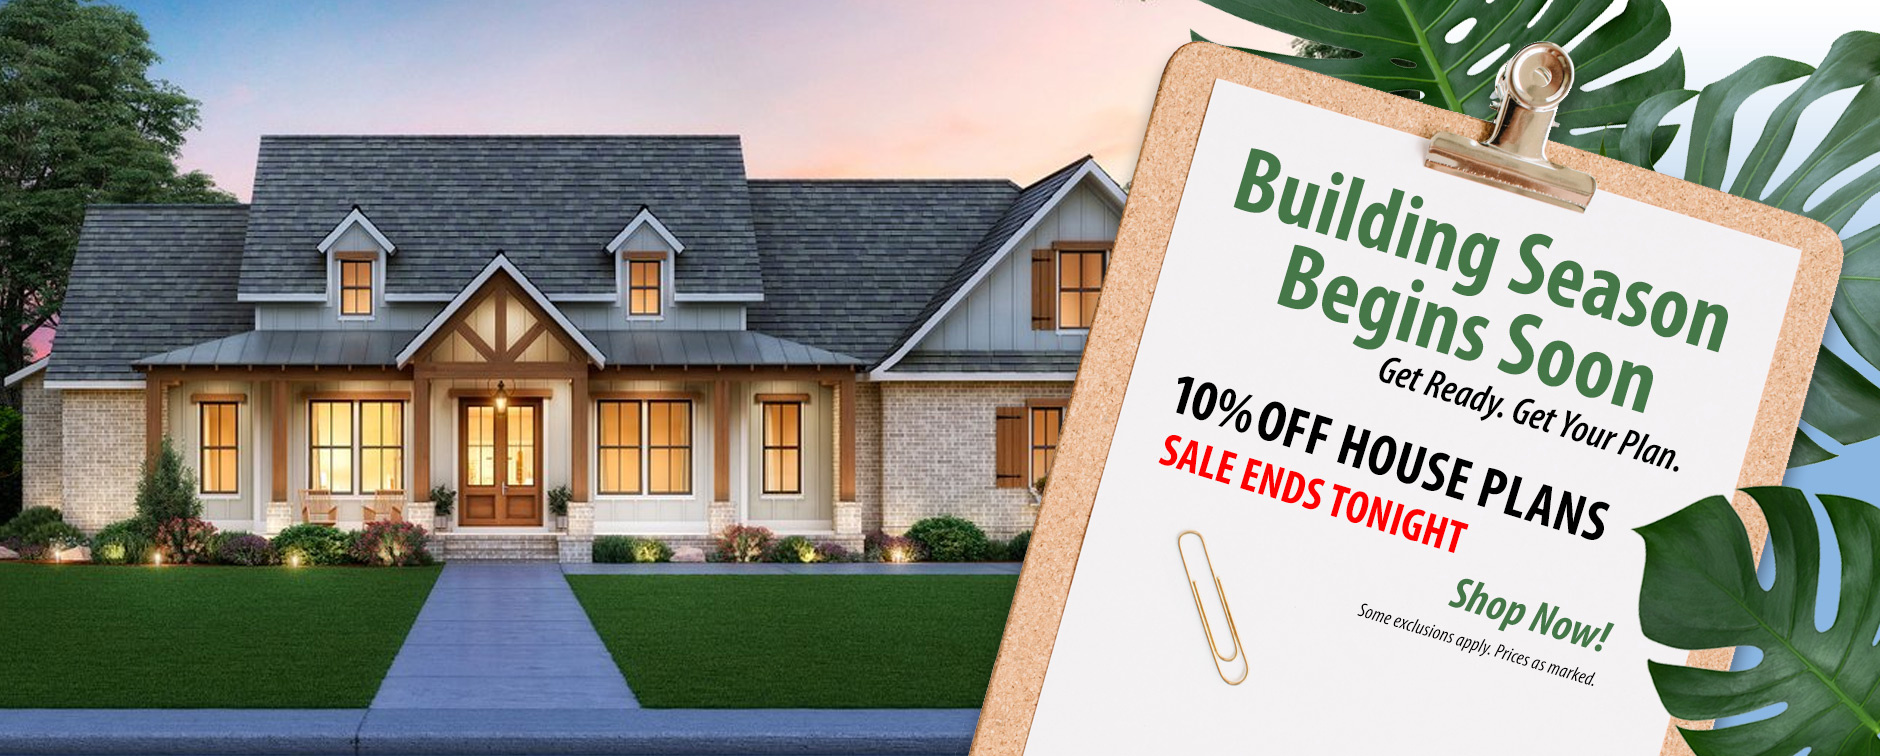 Enjoy 10% Off Thousands of House Plans, But Only Until Tonight. Shop Now